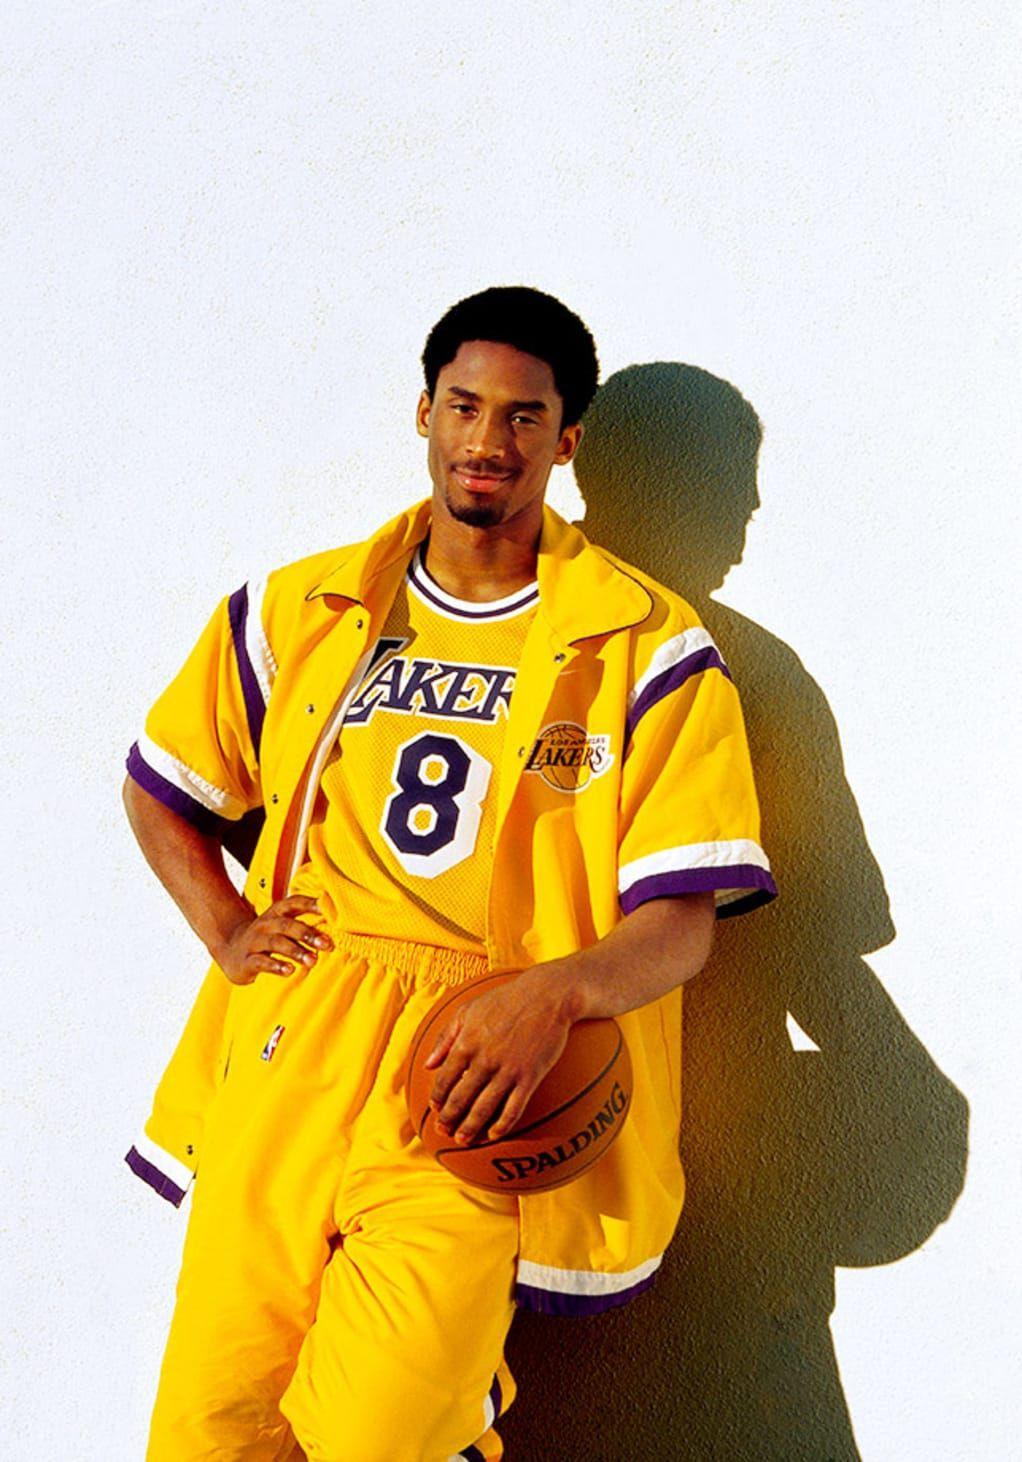 Kobe Bryant in his Lakers jersey holding a basketball. - Kobe Bryant